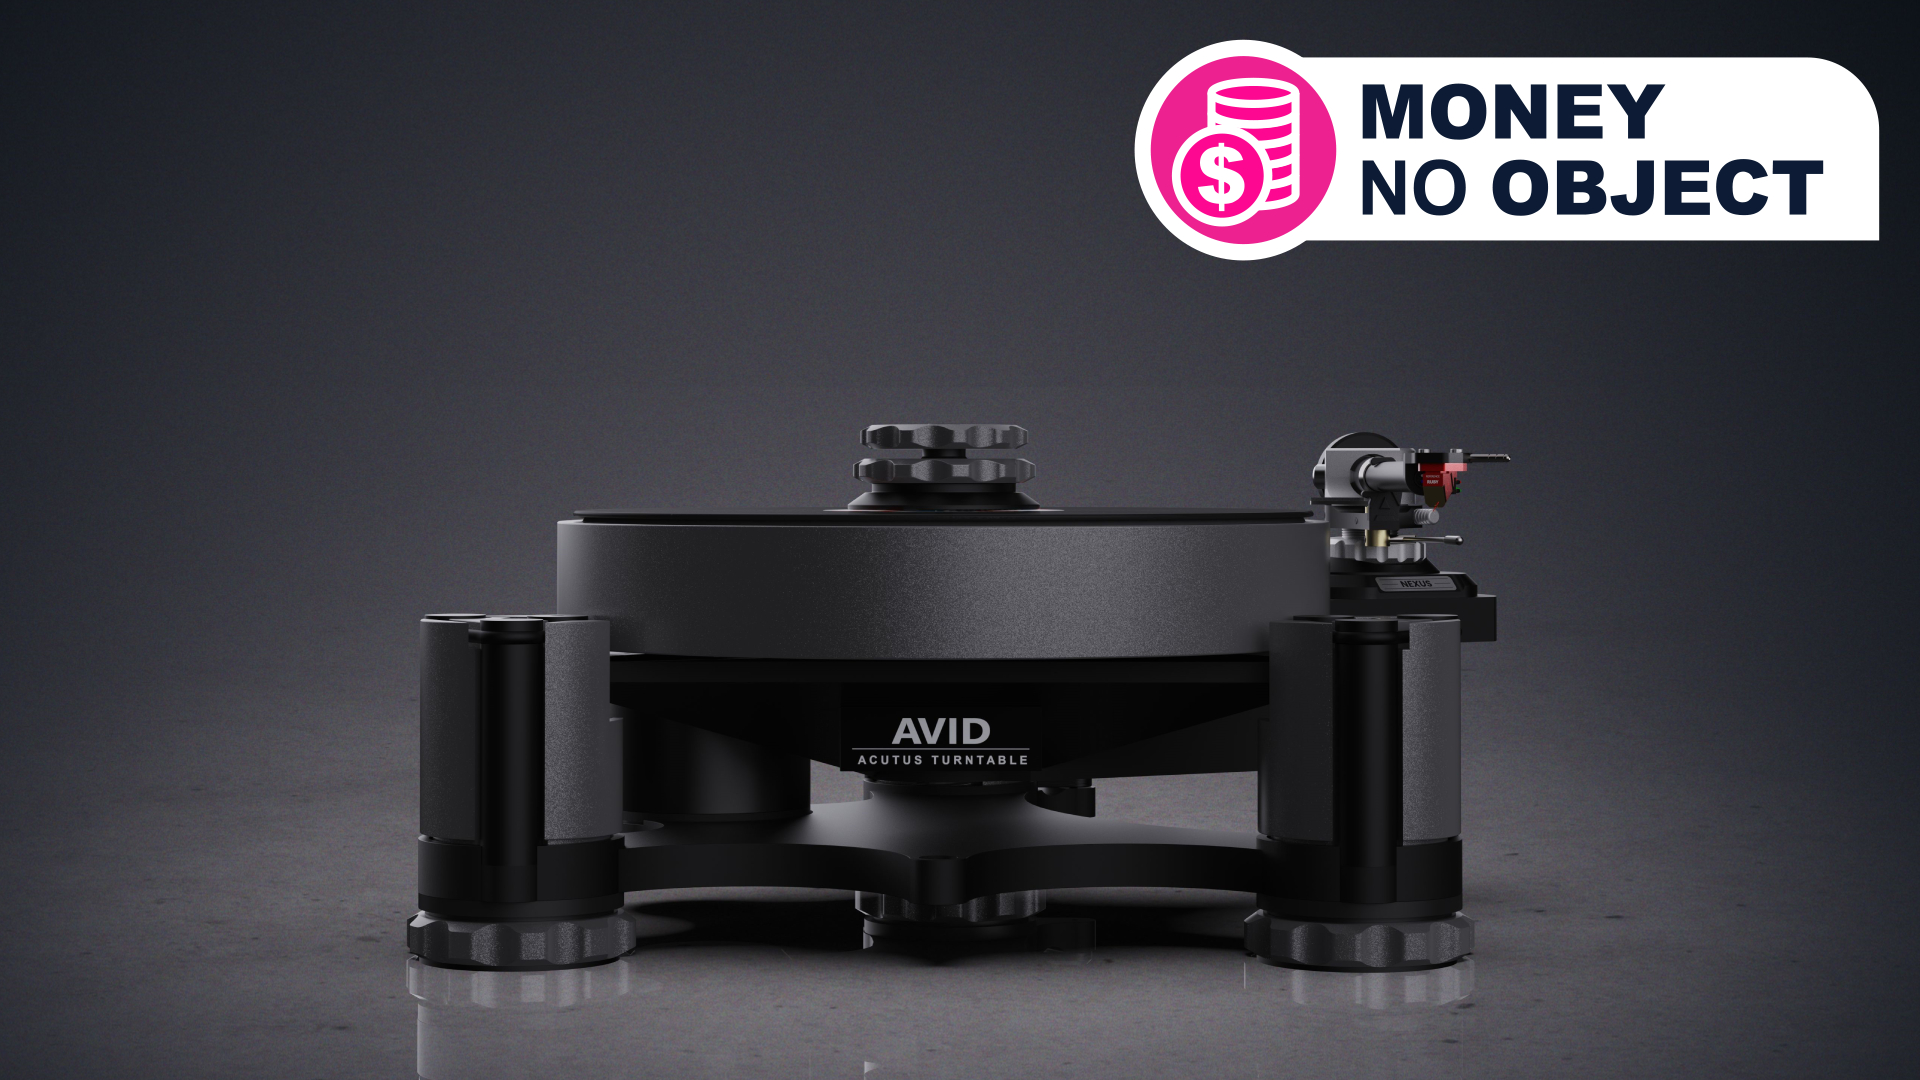 Avid's Acutus Dark Iron turntable alone weighs 10kg – so I know it's pretty serious